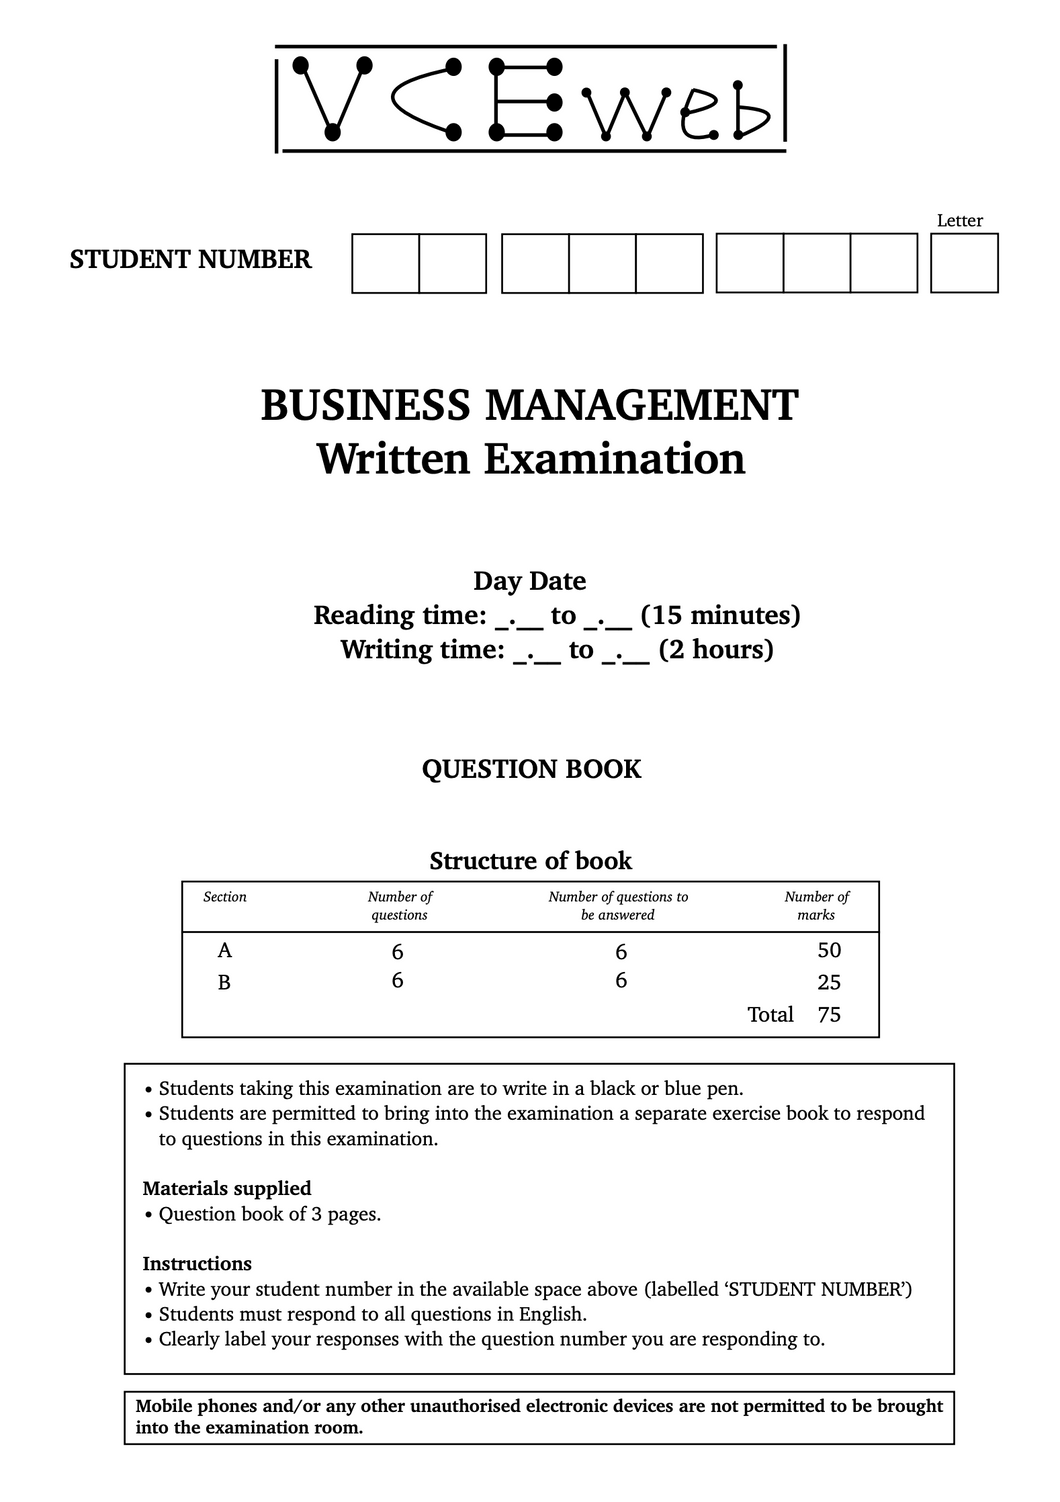 Business Management Units 3&4 Practice Examination Questions + Solutions - 2021: